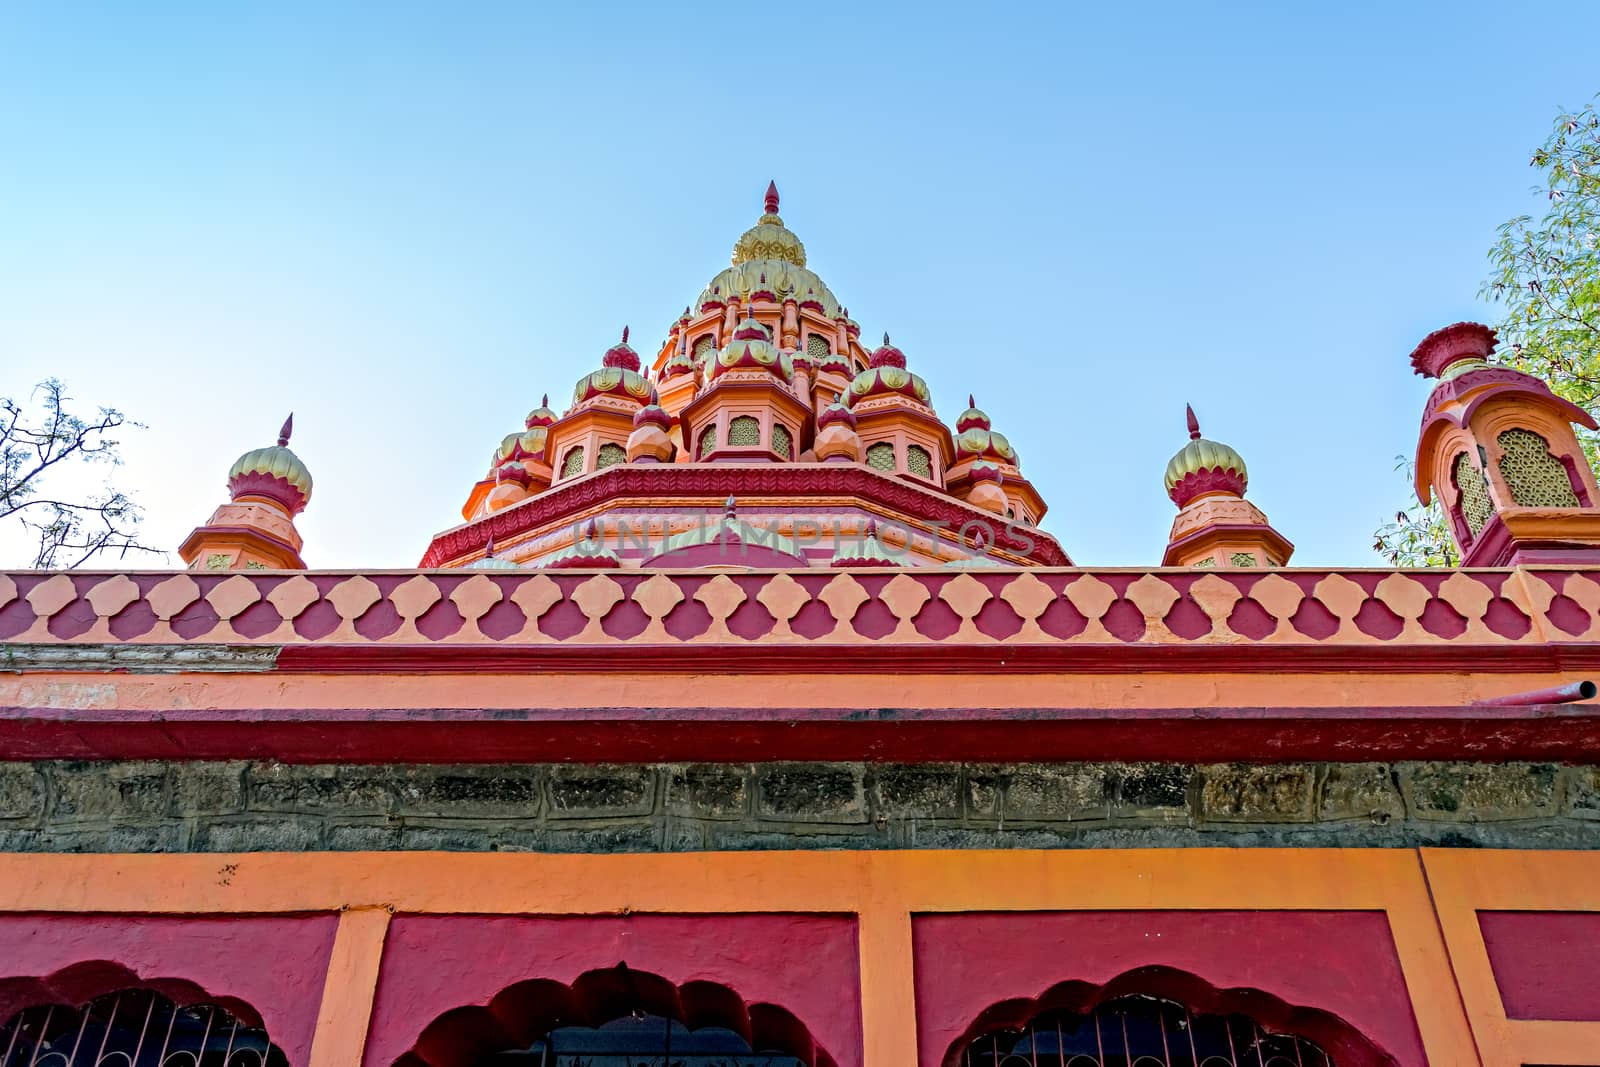 Close up of dome of Parvati temple on a clear blue sky background. by lalam